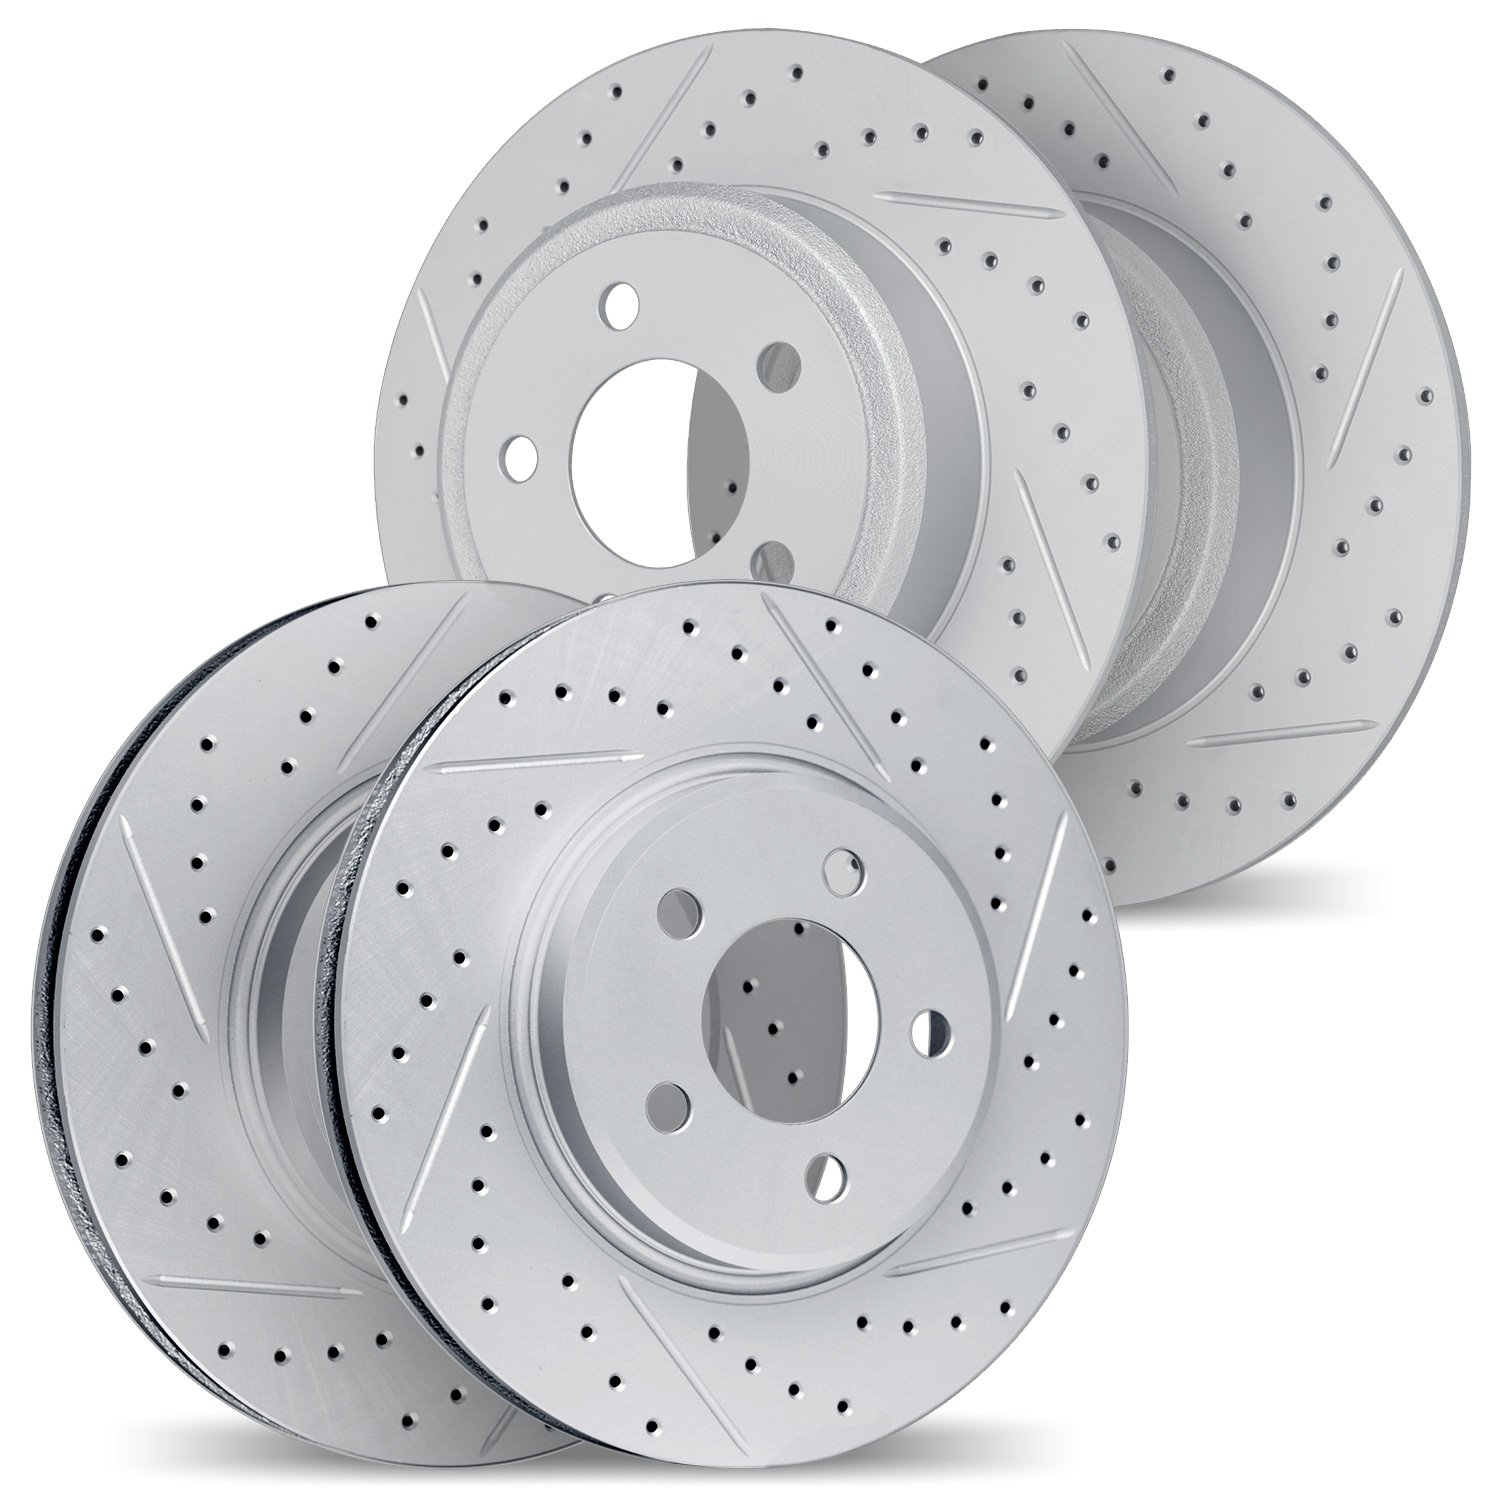 2004-55004 Geoperformance Drilled/Slotted Brake Rotors, 2003-2011 Ford/Lincoln/Mercury/Mazda, Position: Front and Rear